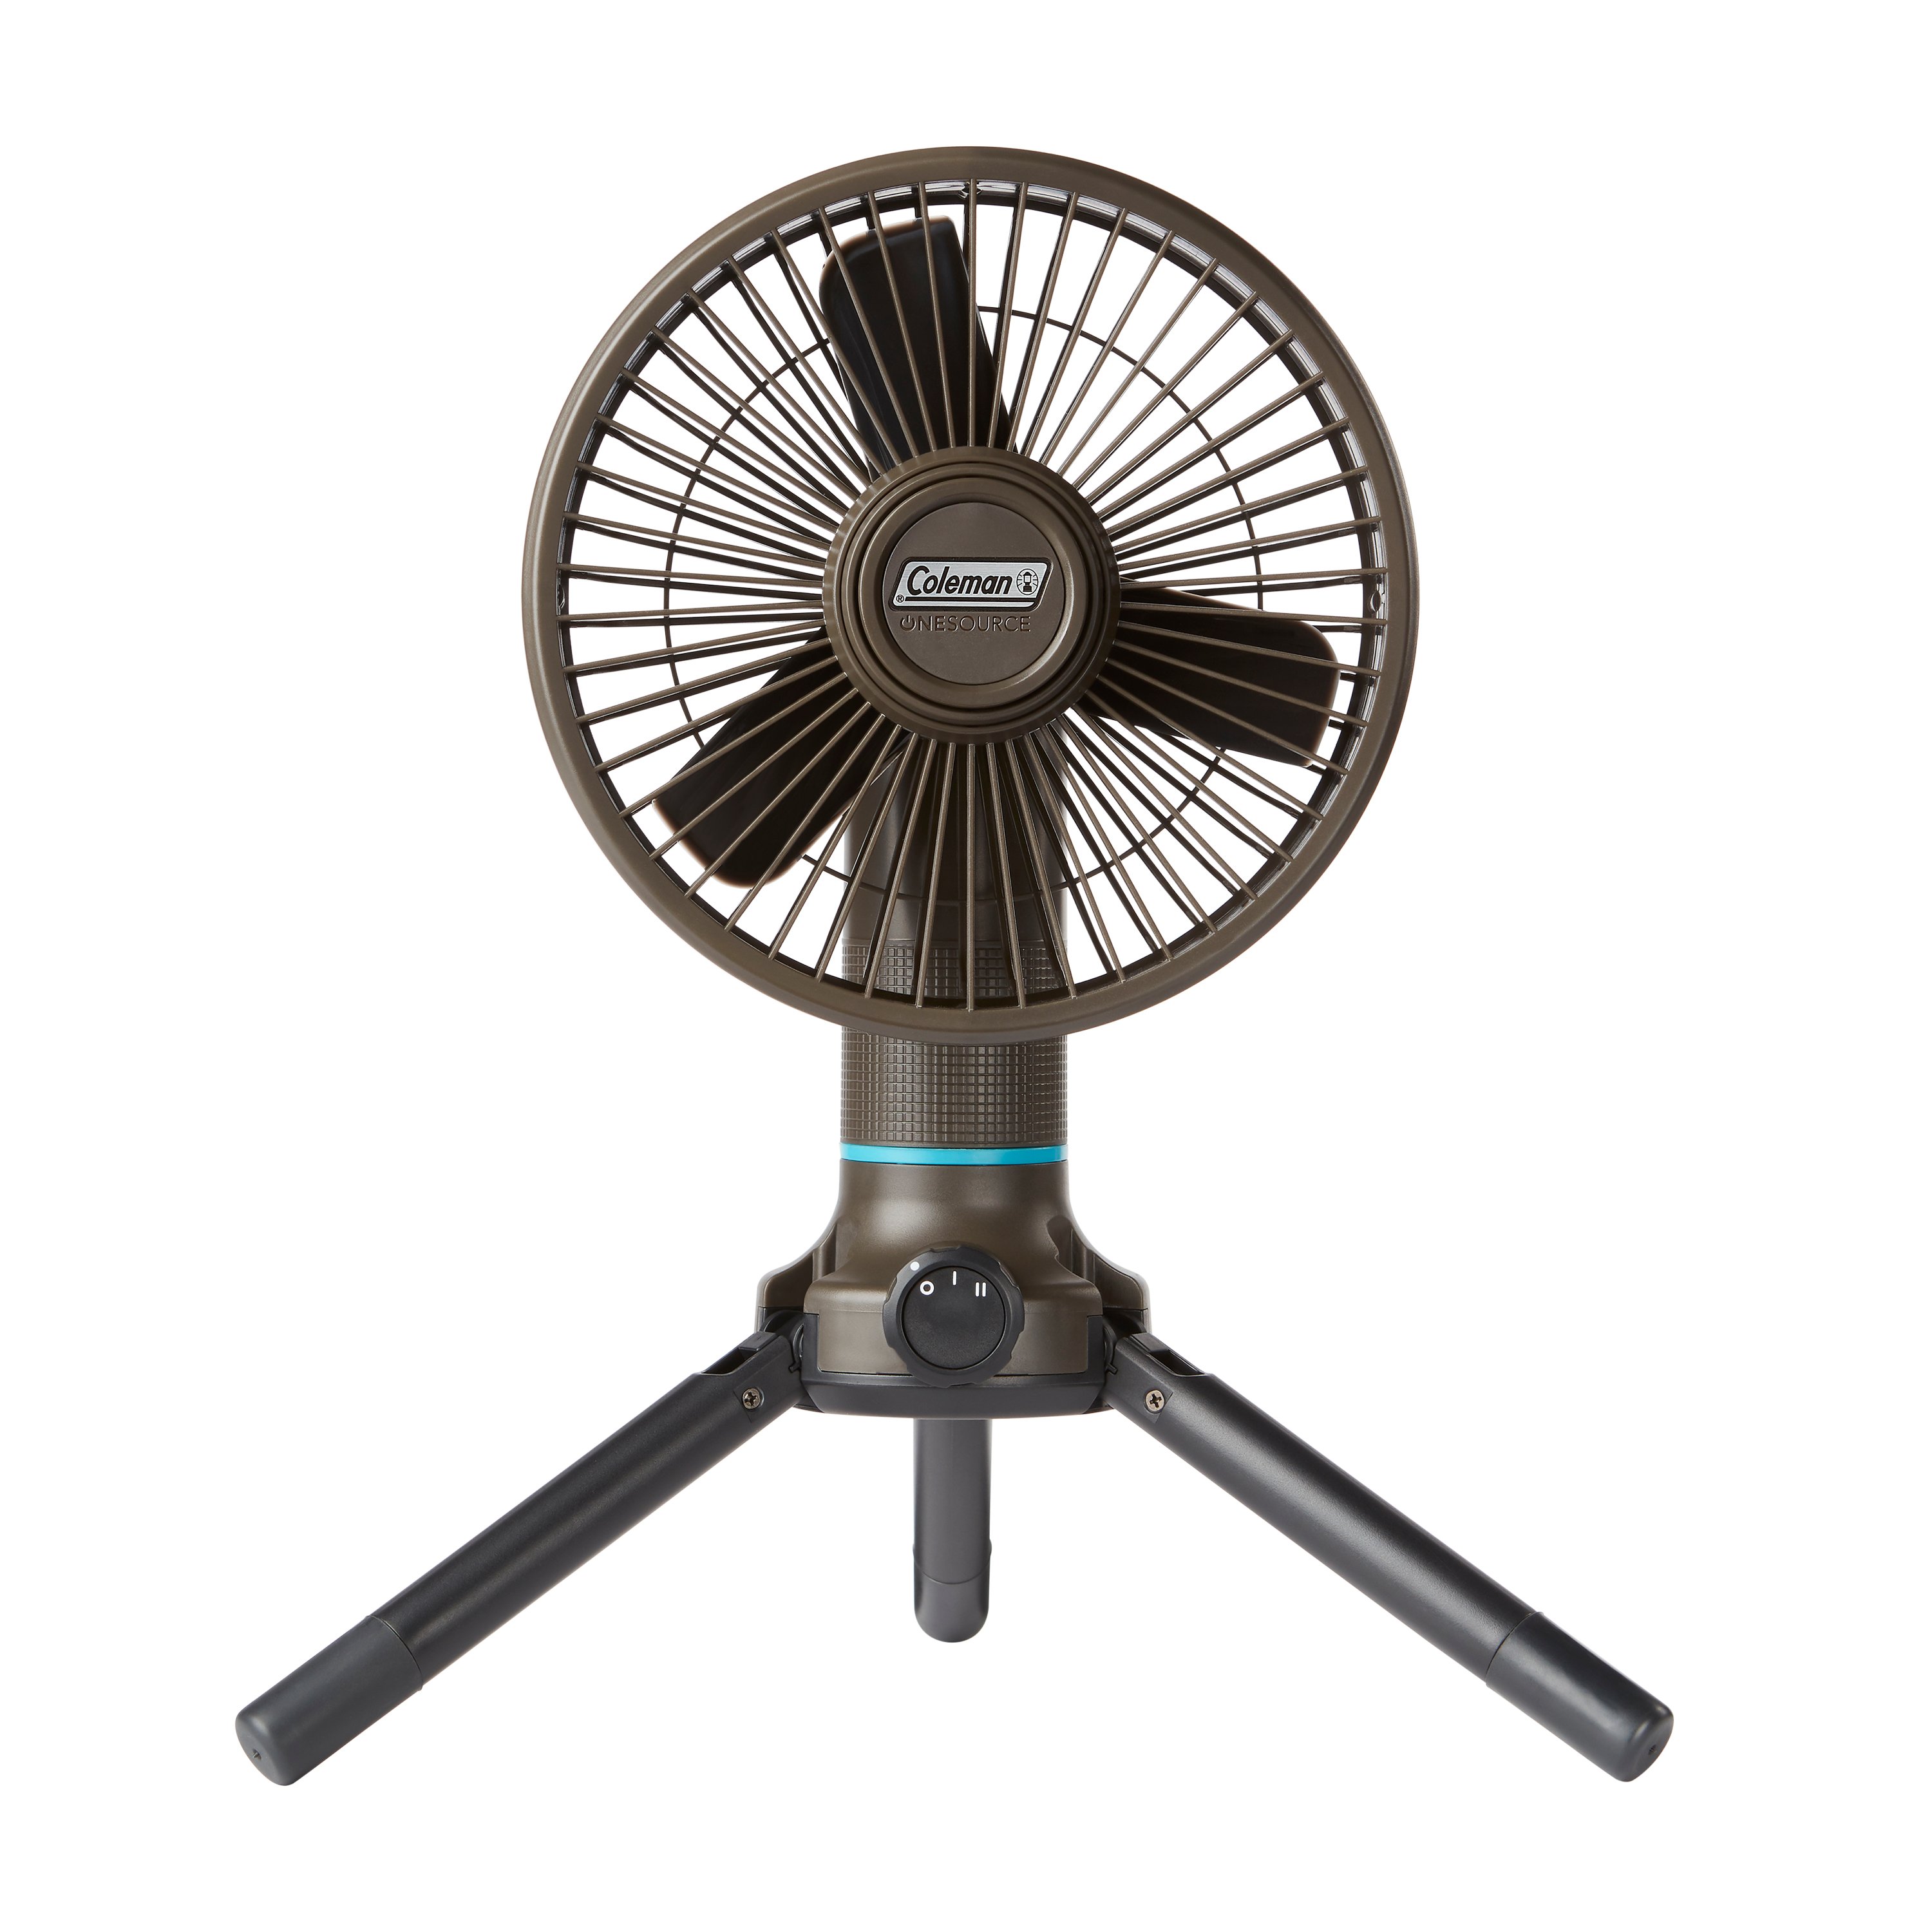 Coleman Onesource Multi-Speed Portable Fan & Rechargeable Battery, Black, Built in Flash Light - image 1 of 8